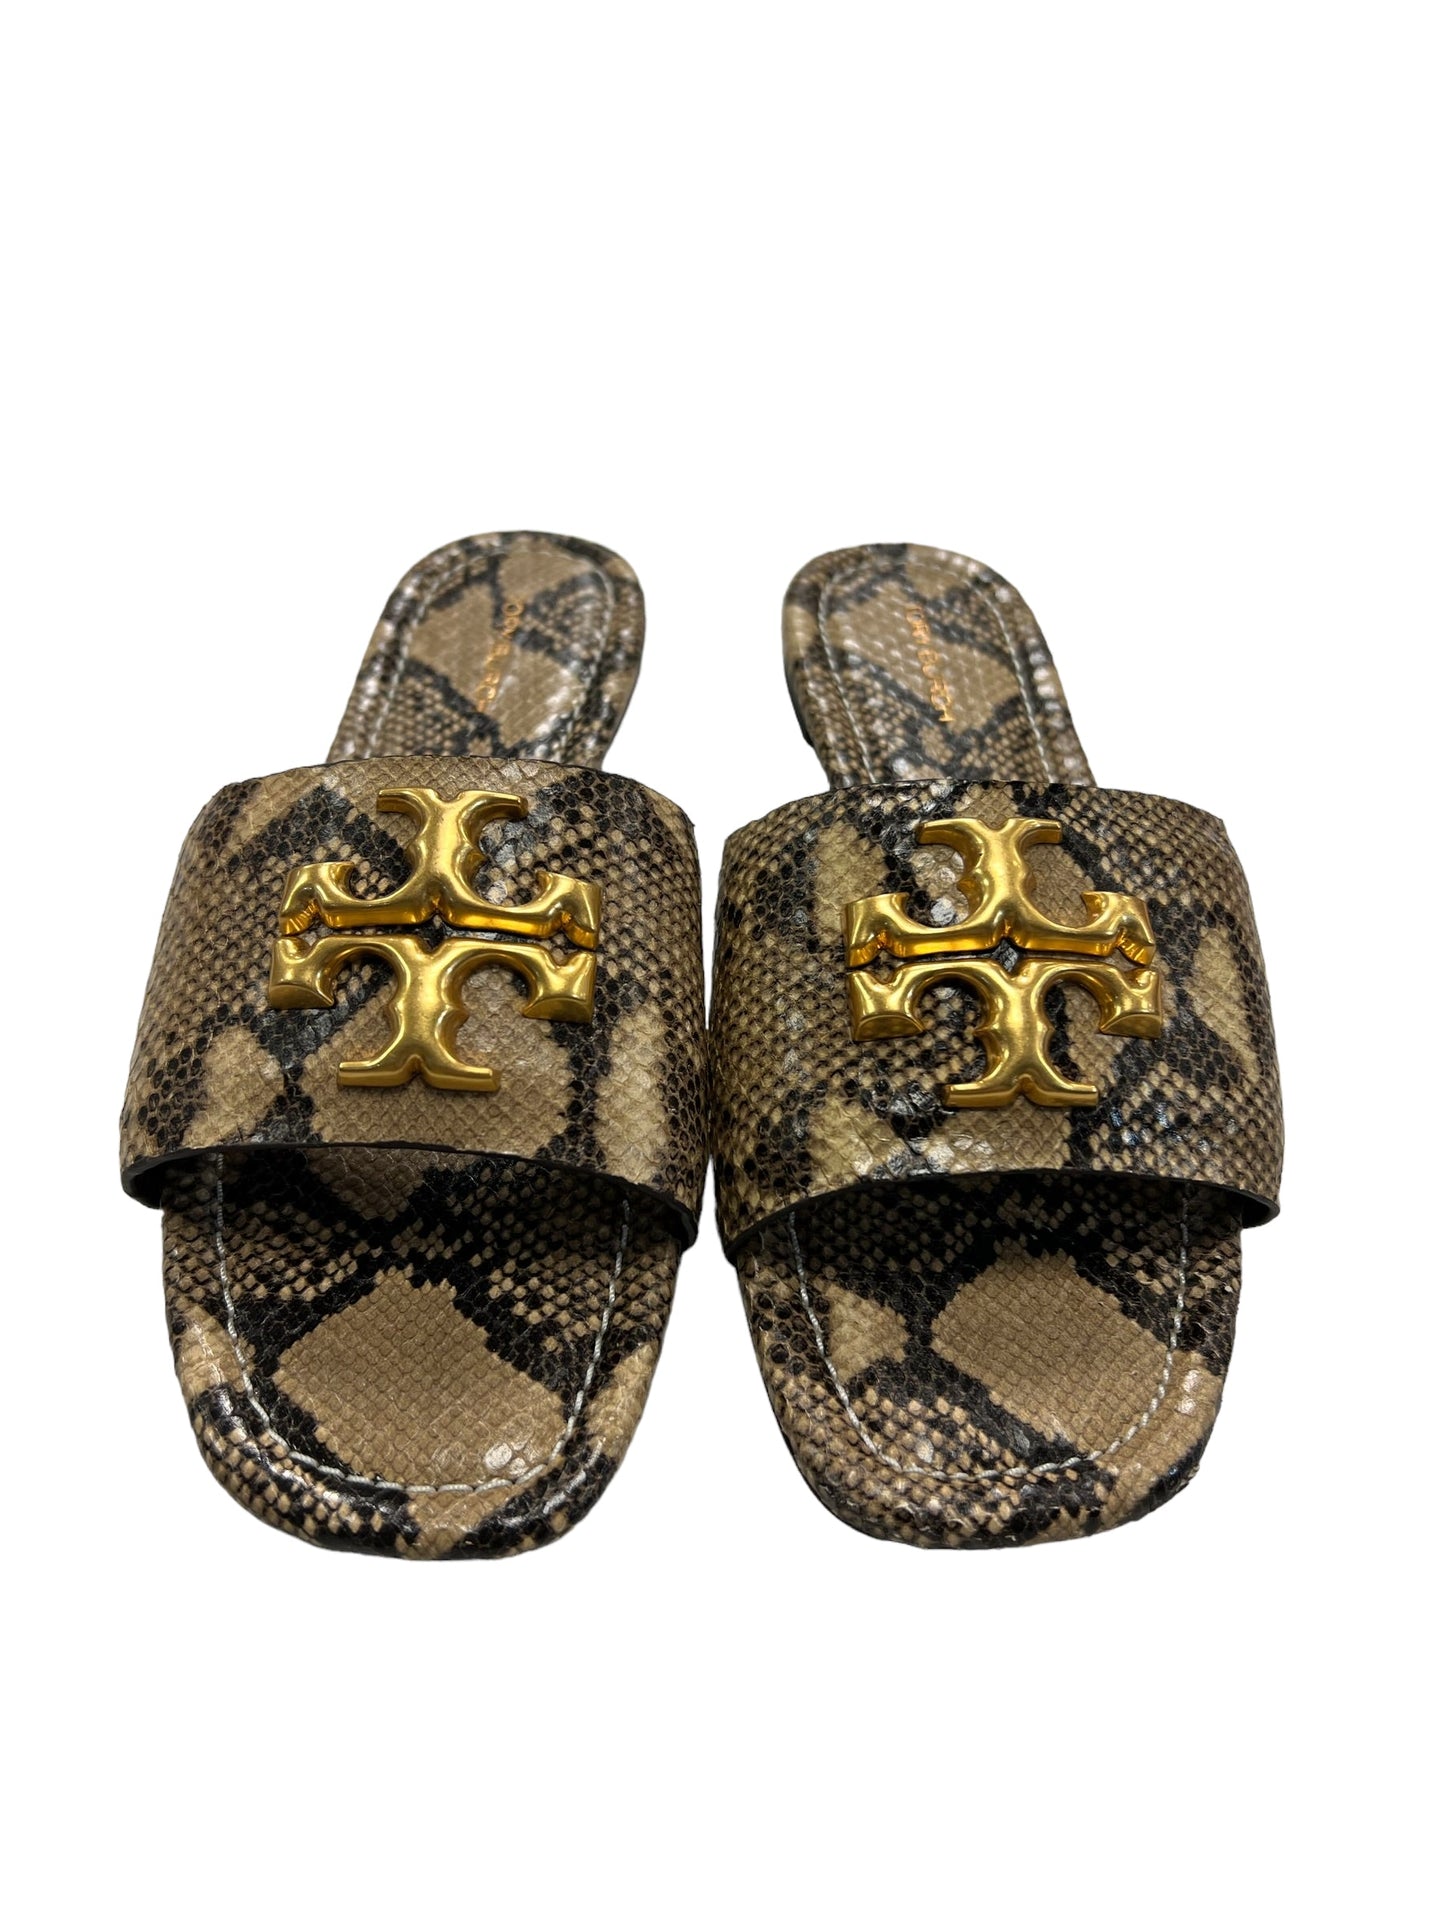 Sandals Designer By Tory Burch  Size: 5.5